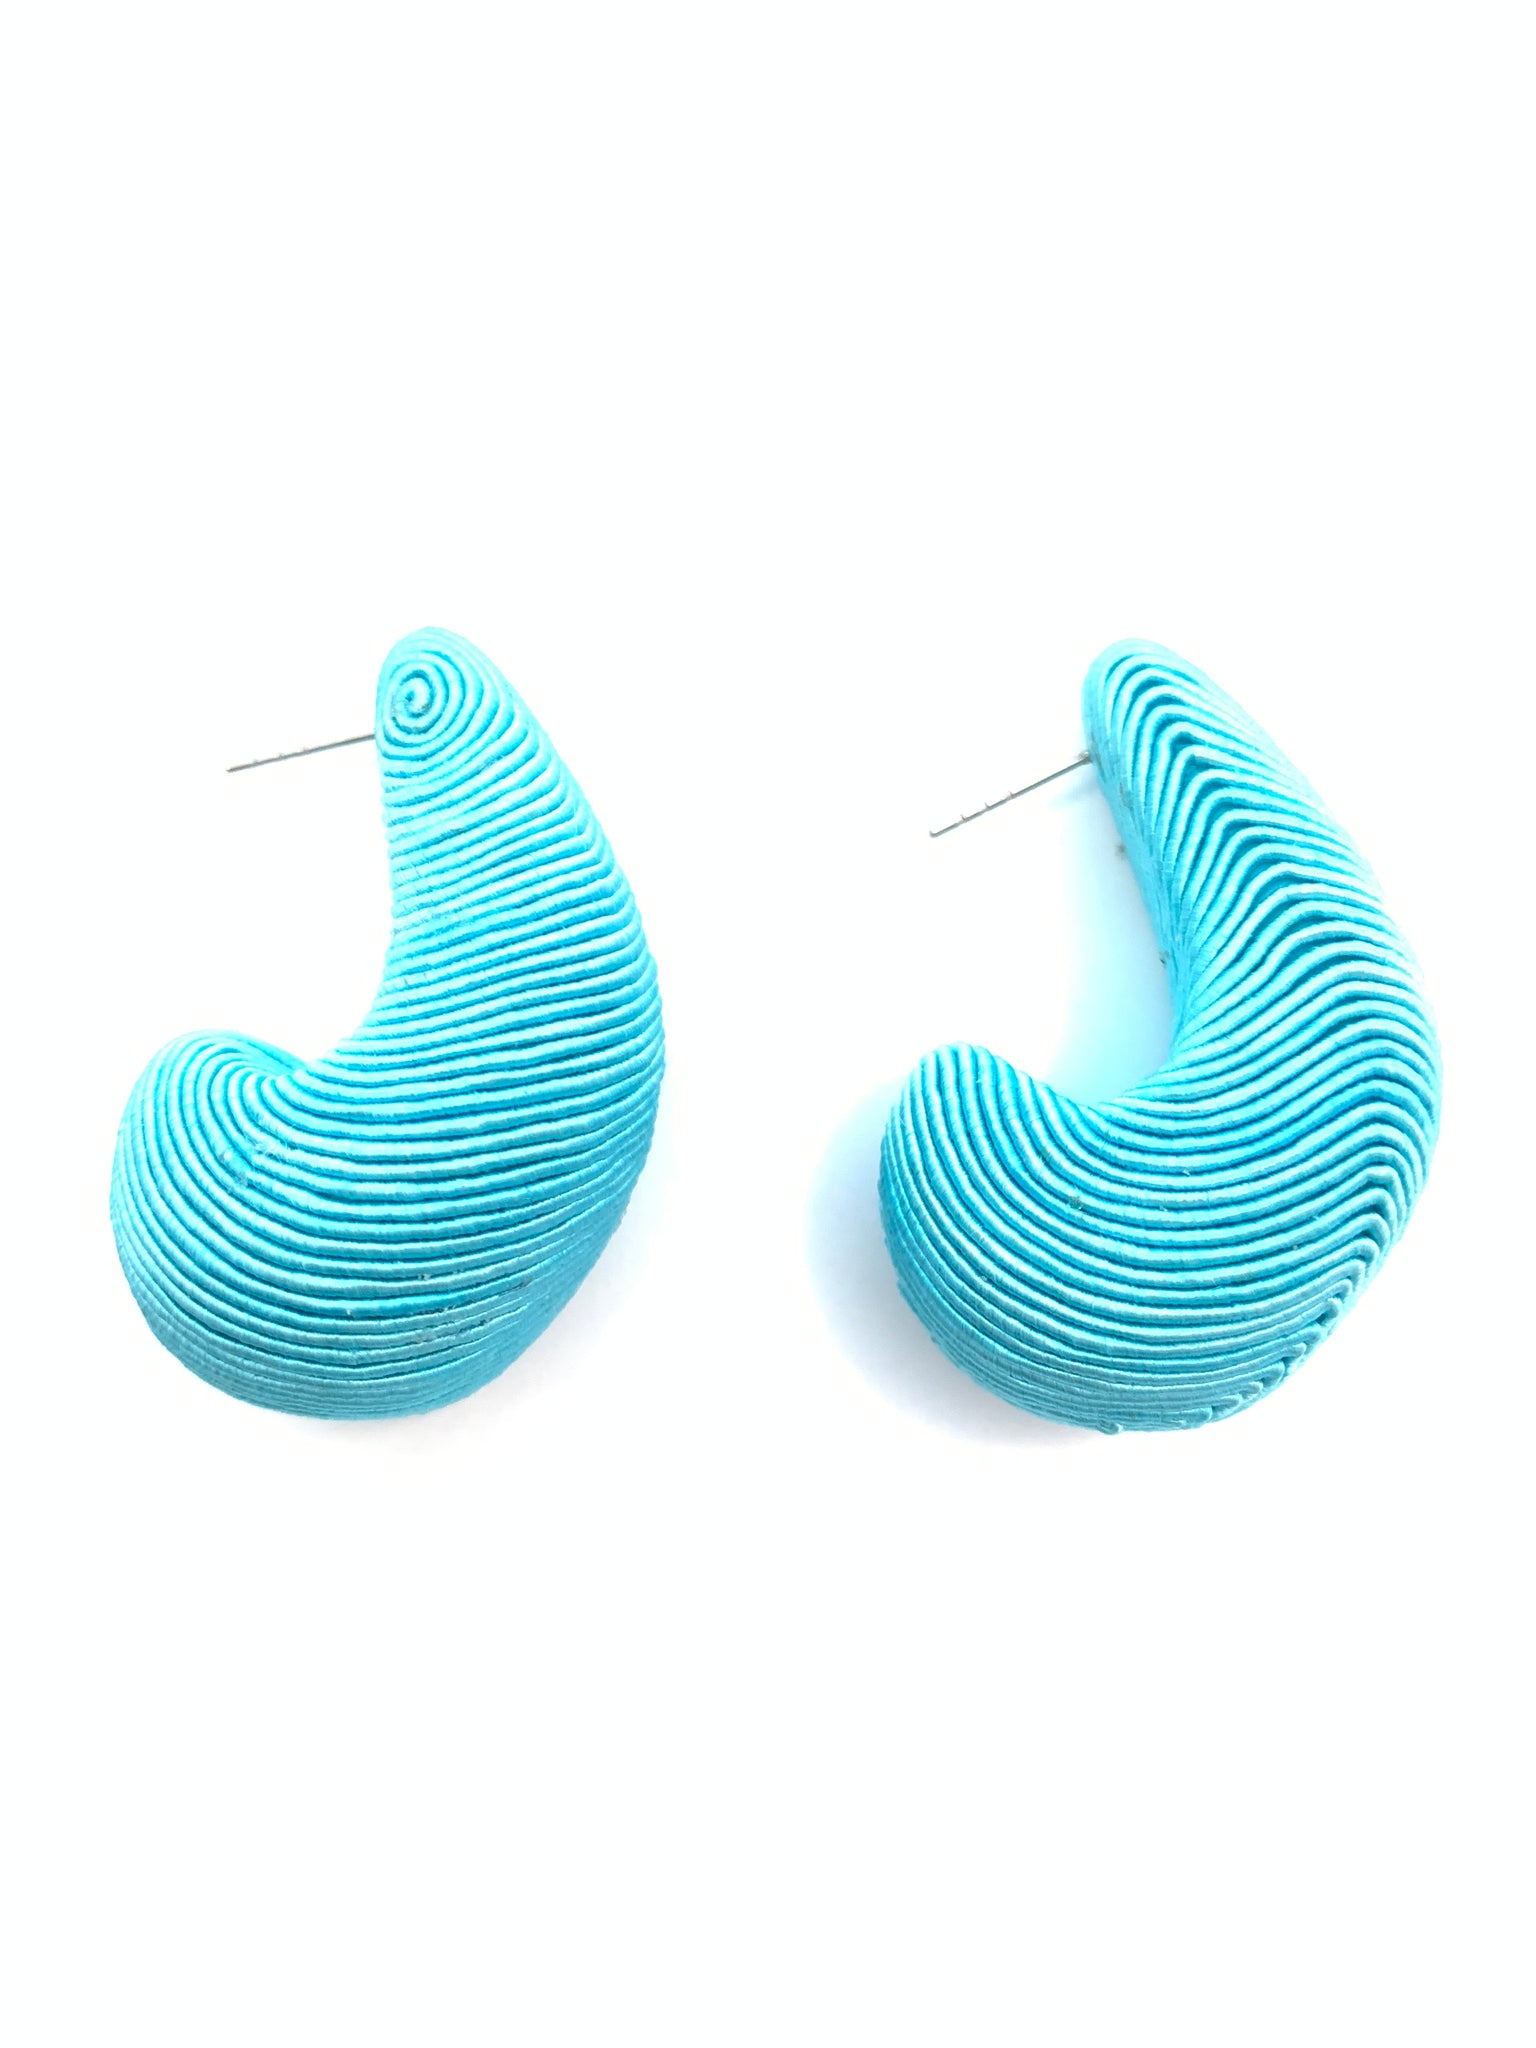 Cord Wrapped Teardrop Earring - Turquoise